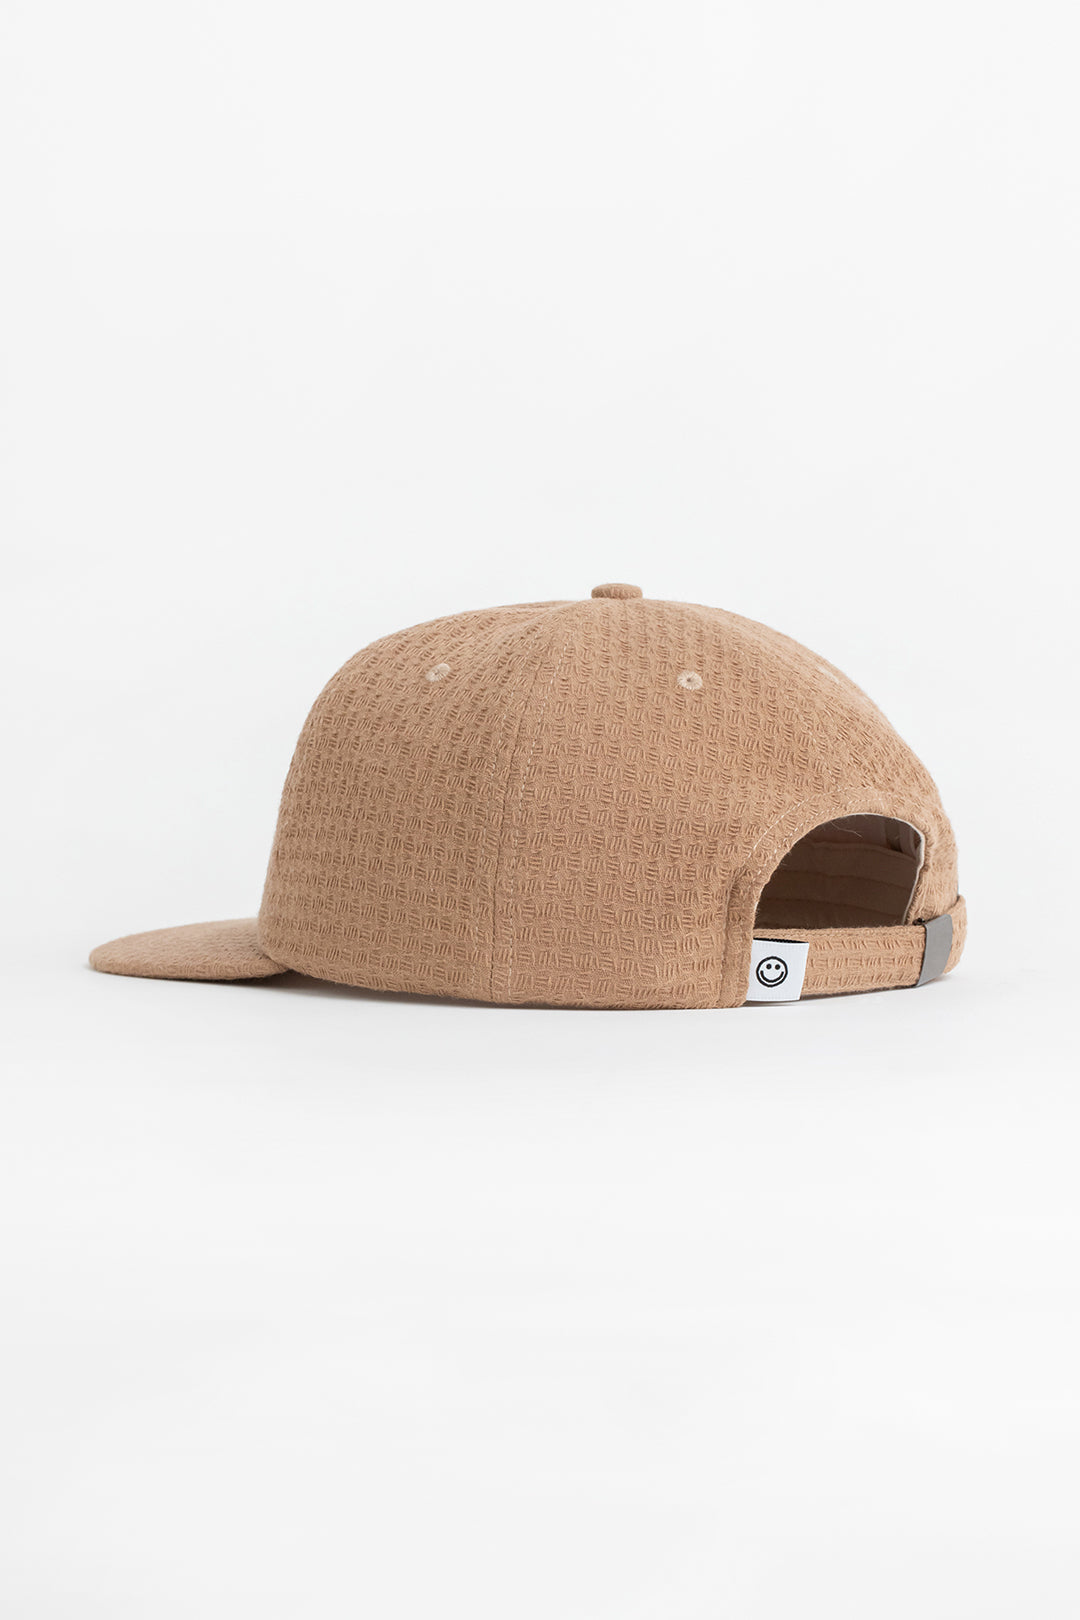 Light brown floppy cap made from 100% organic cotton from Rotholz